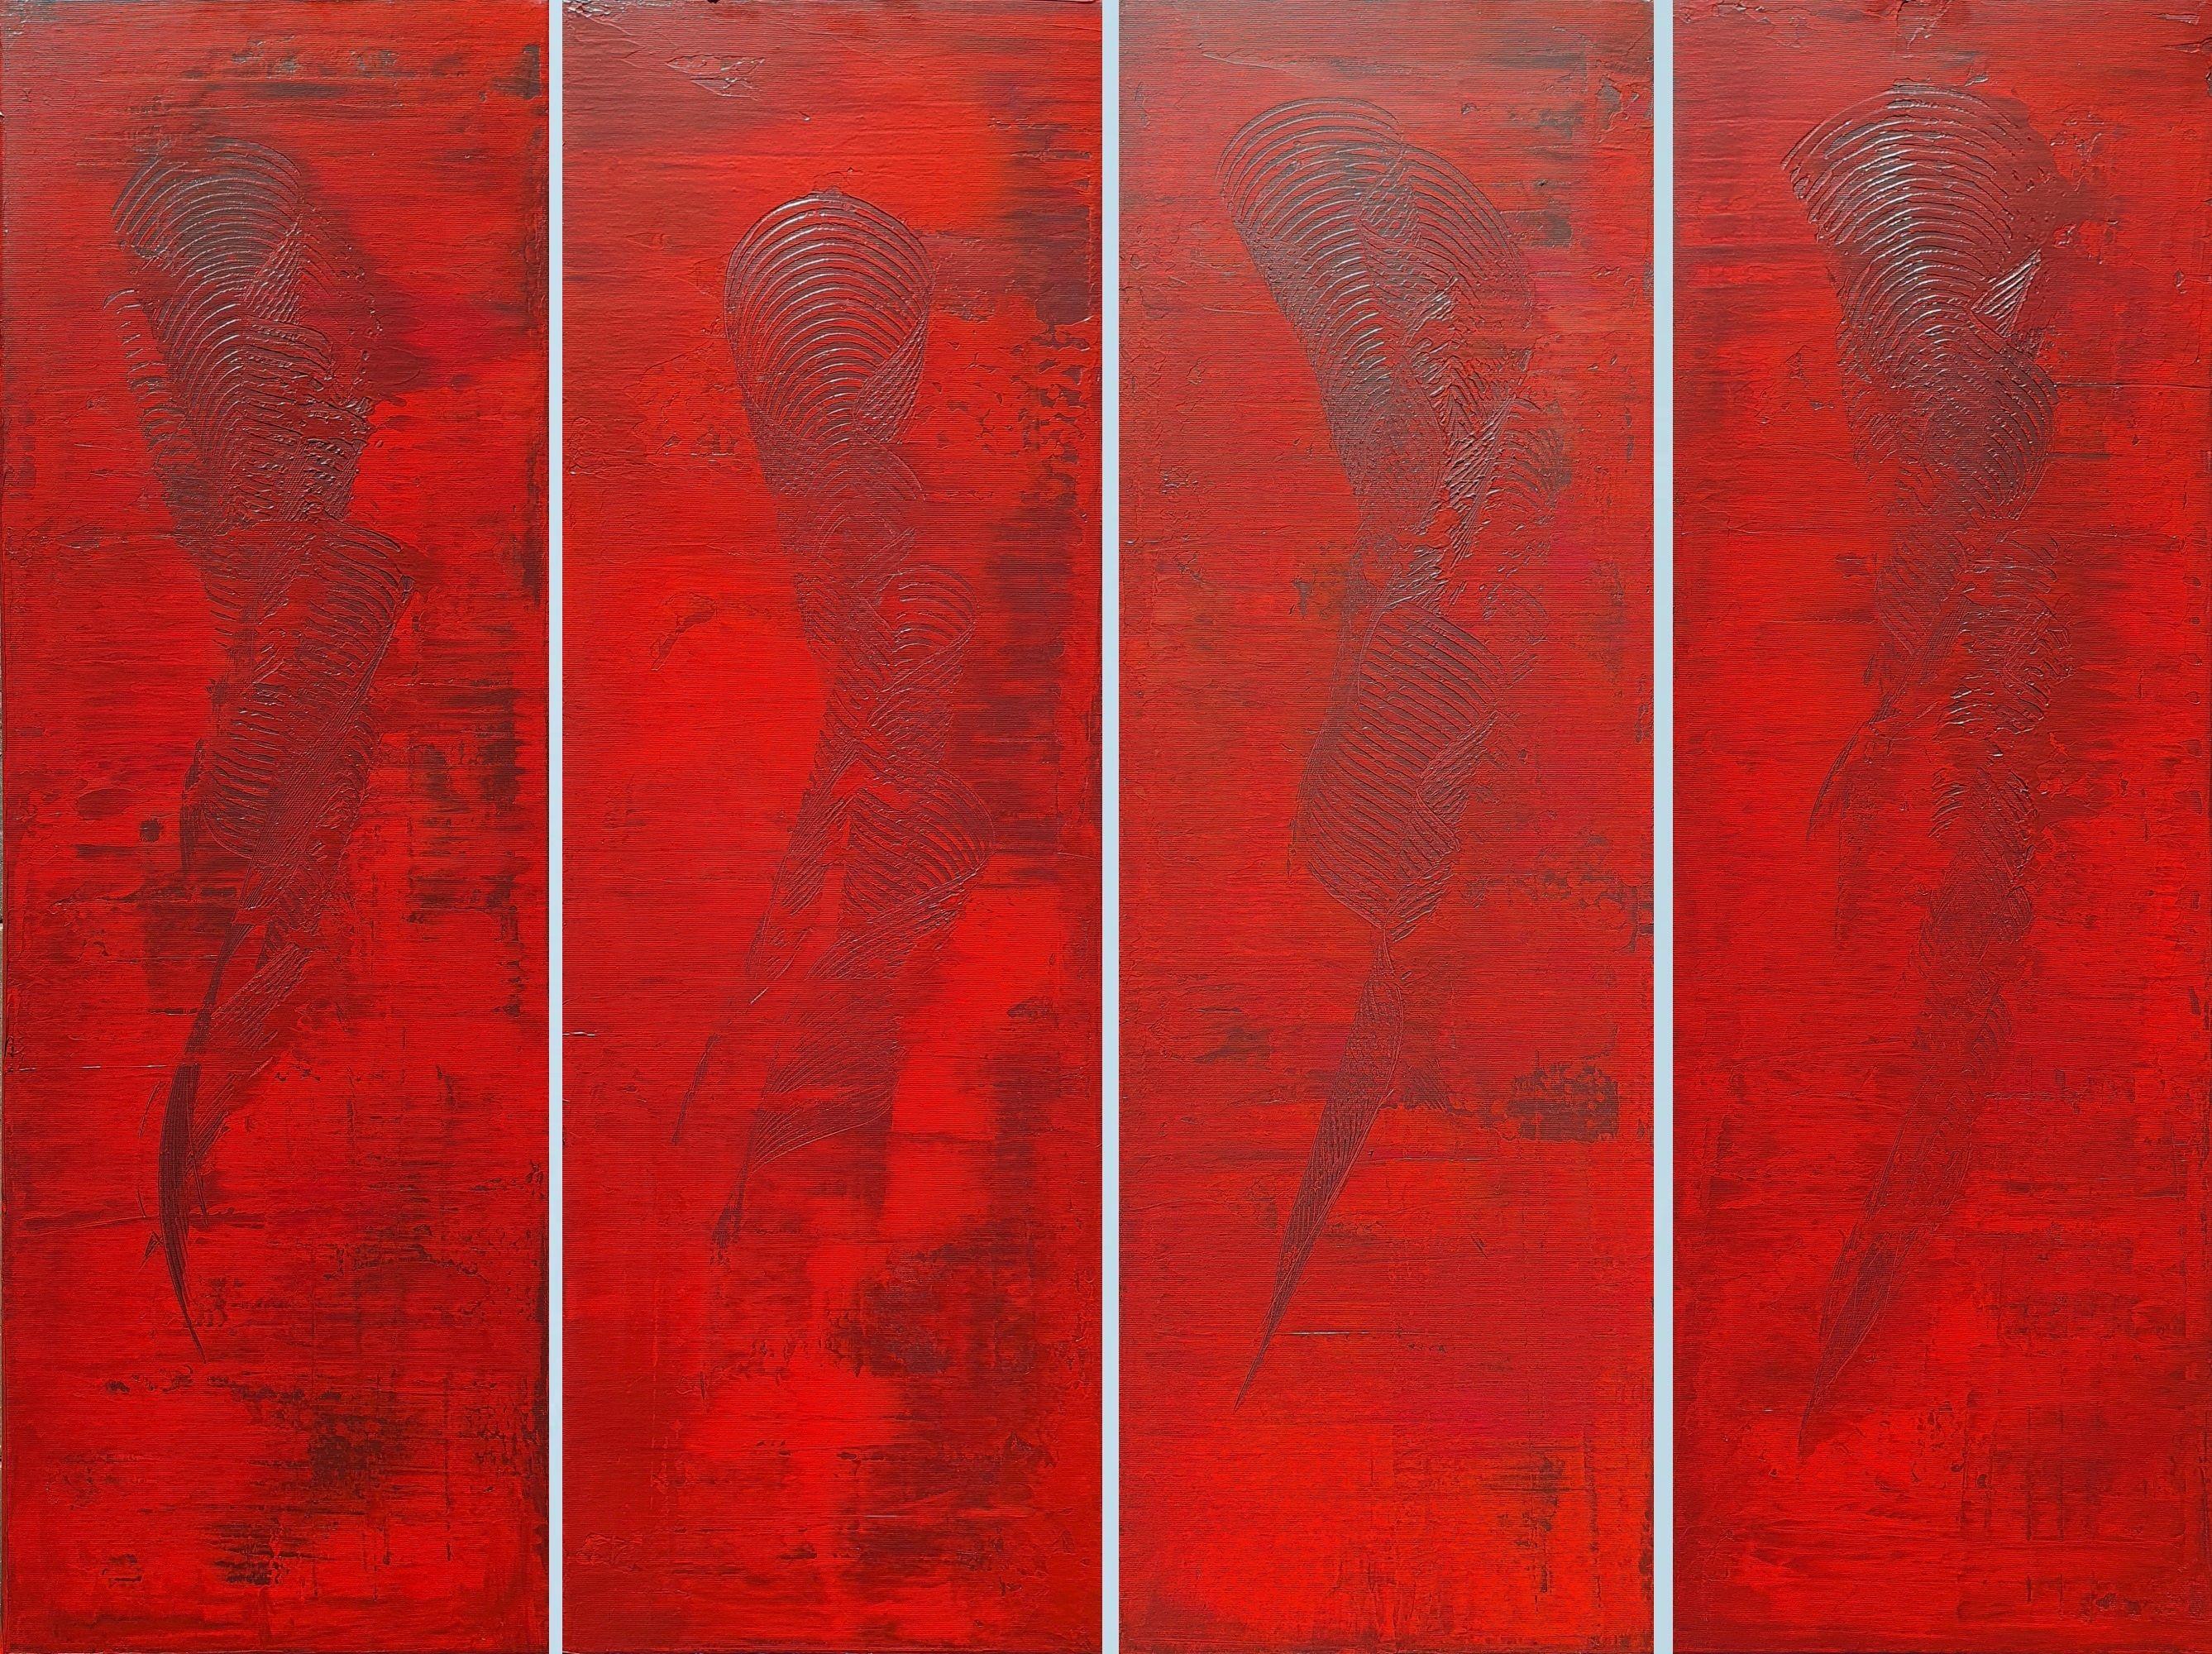 An original one-of-a-kind palette knife abstract painting with a gentle texture.    Another piece from the collection Love Vibrations.  Minimalistic yet powerful abstract with pulsing energy created with shades of red.    Professional acrylics on